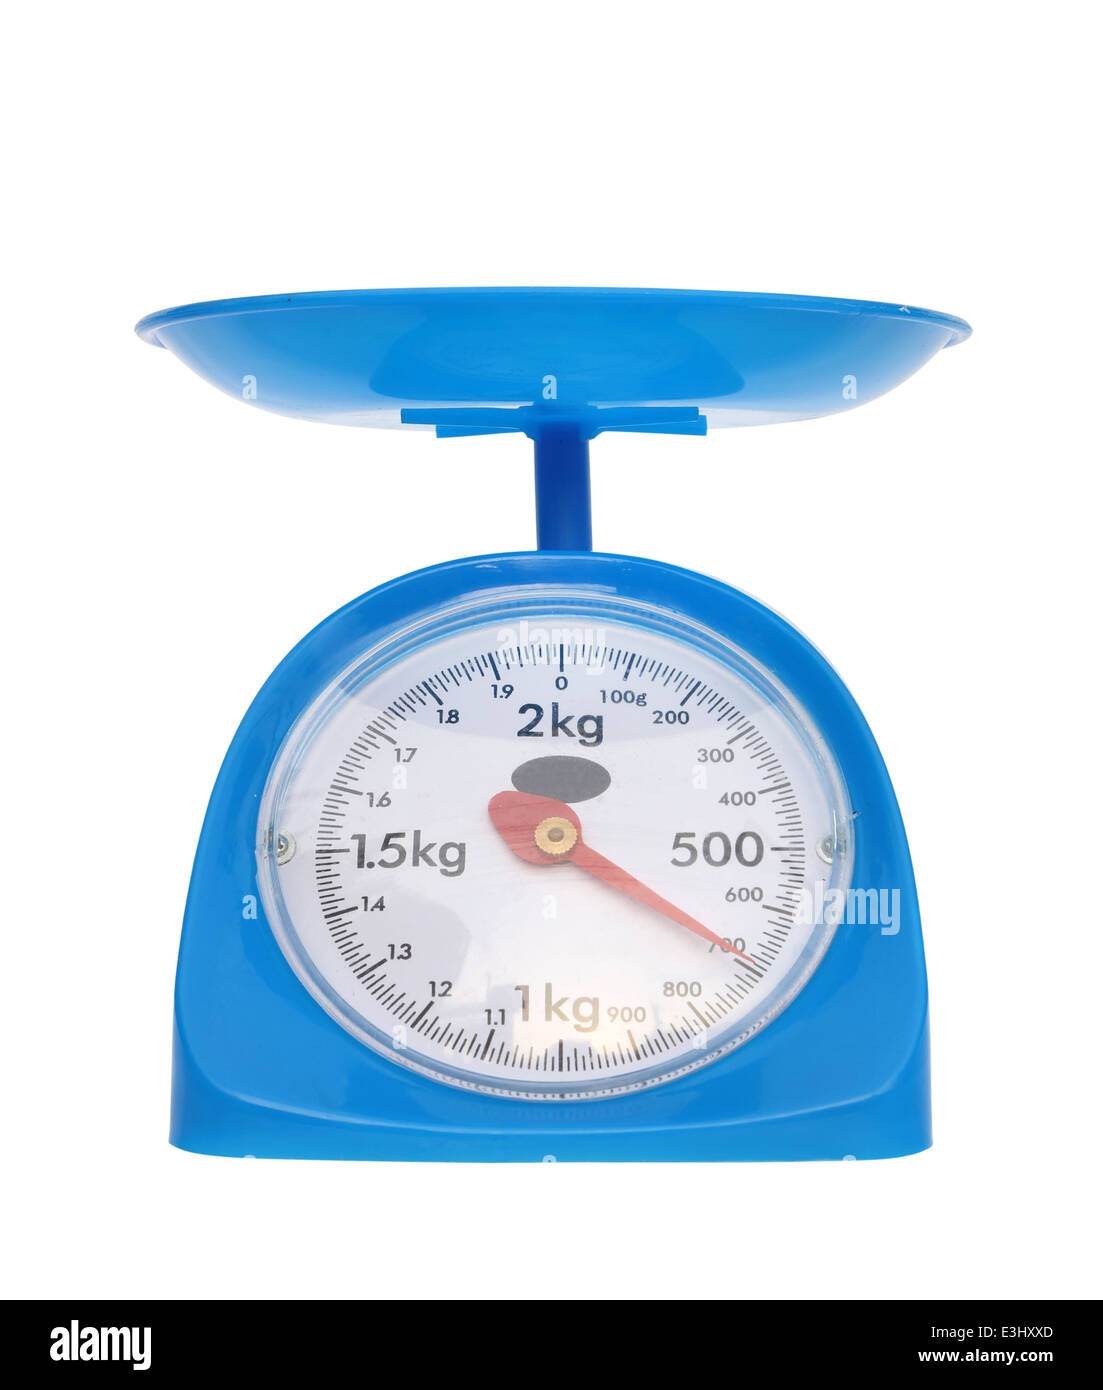 16,300+ Kitchen Scale Stock Photos, Pictures & Royalty-Free Images